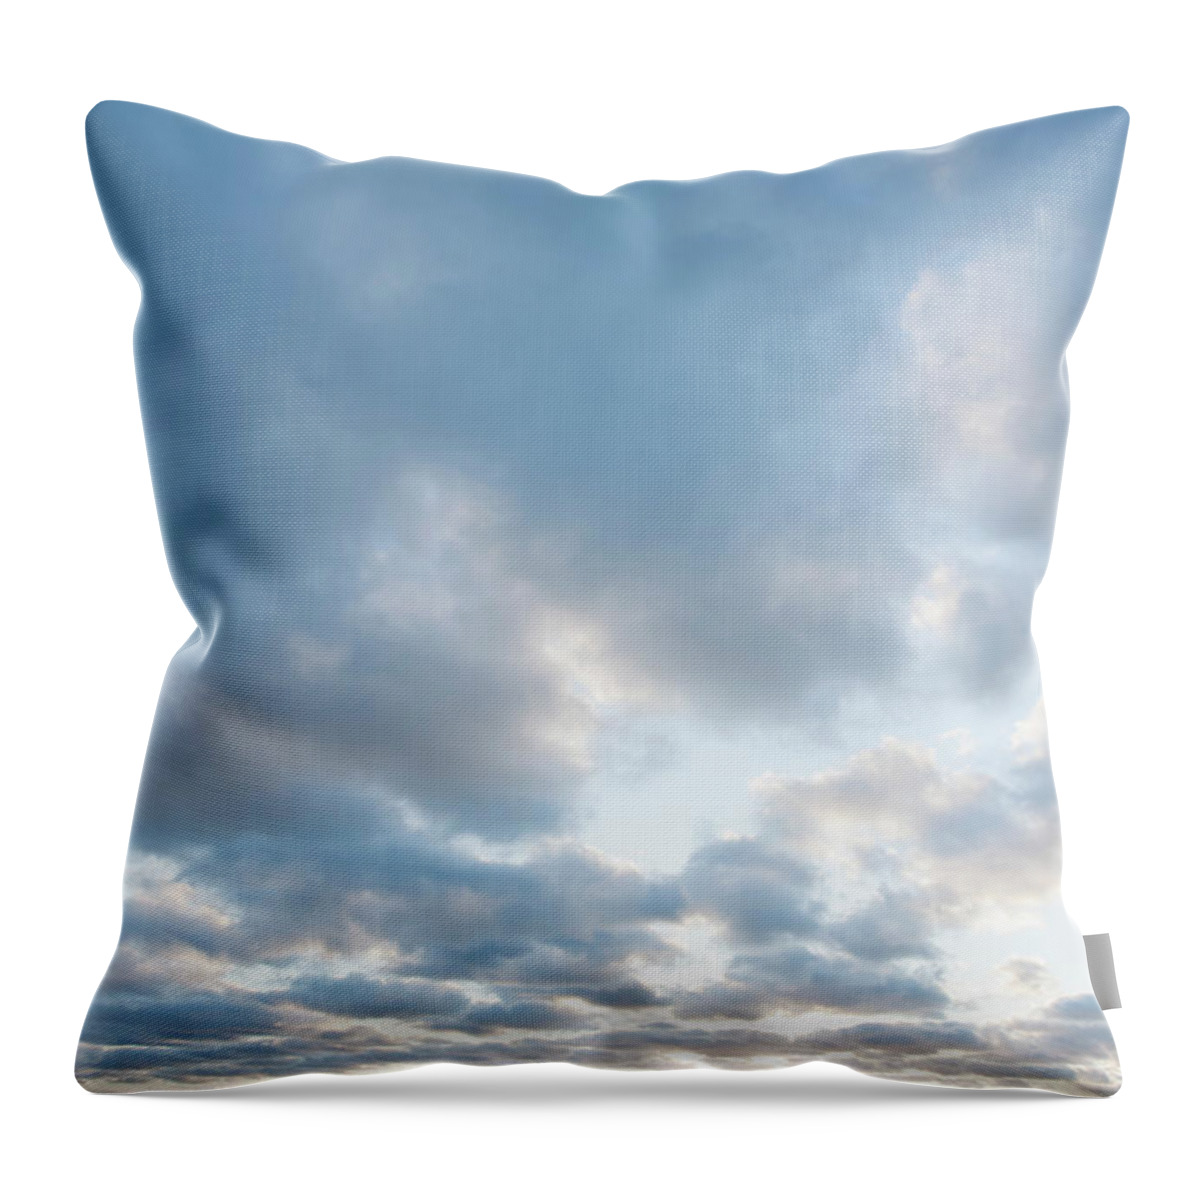 Tranquility Throw Pillow featuring the photograph Clouds In Evening Sky #1 by Nine Ok